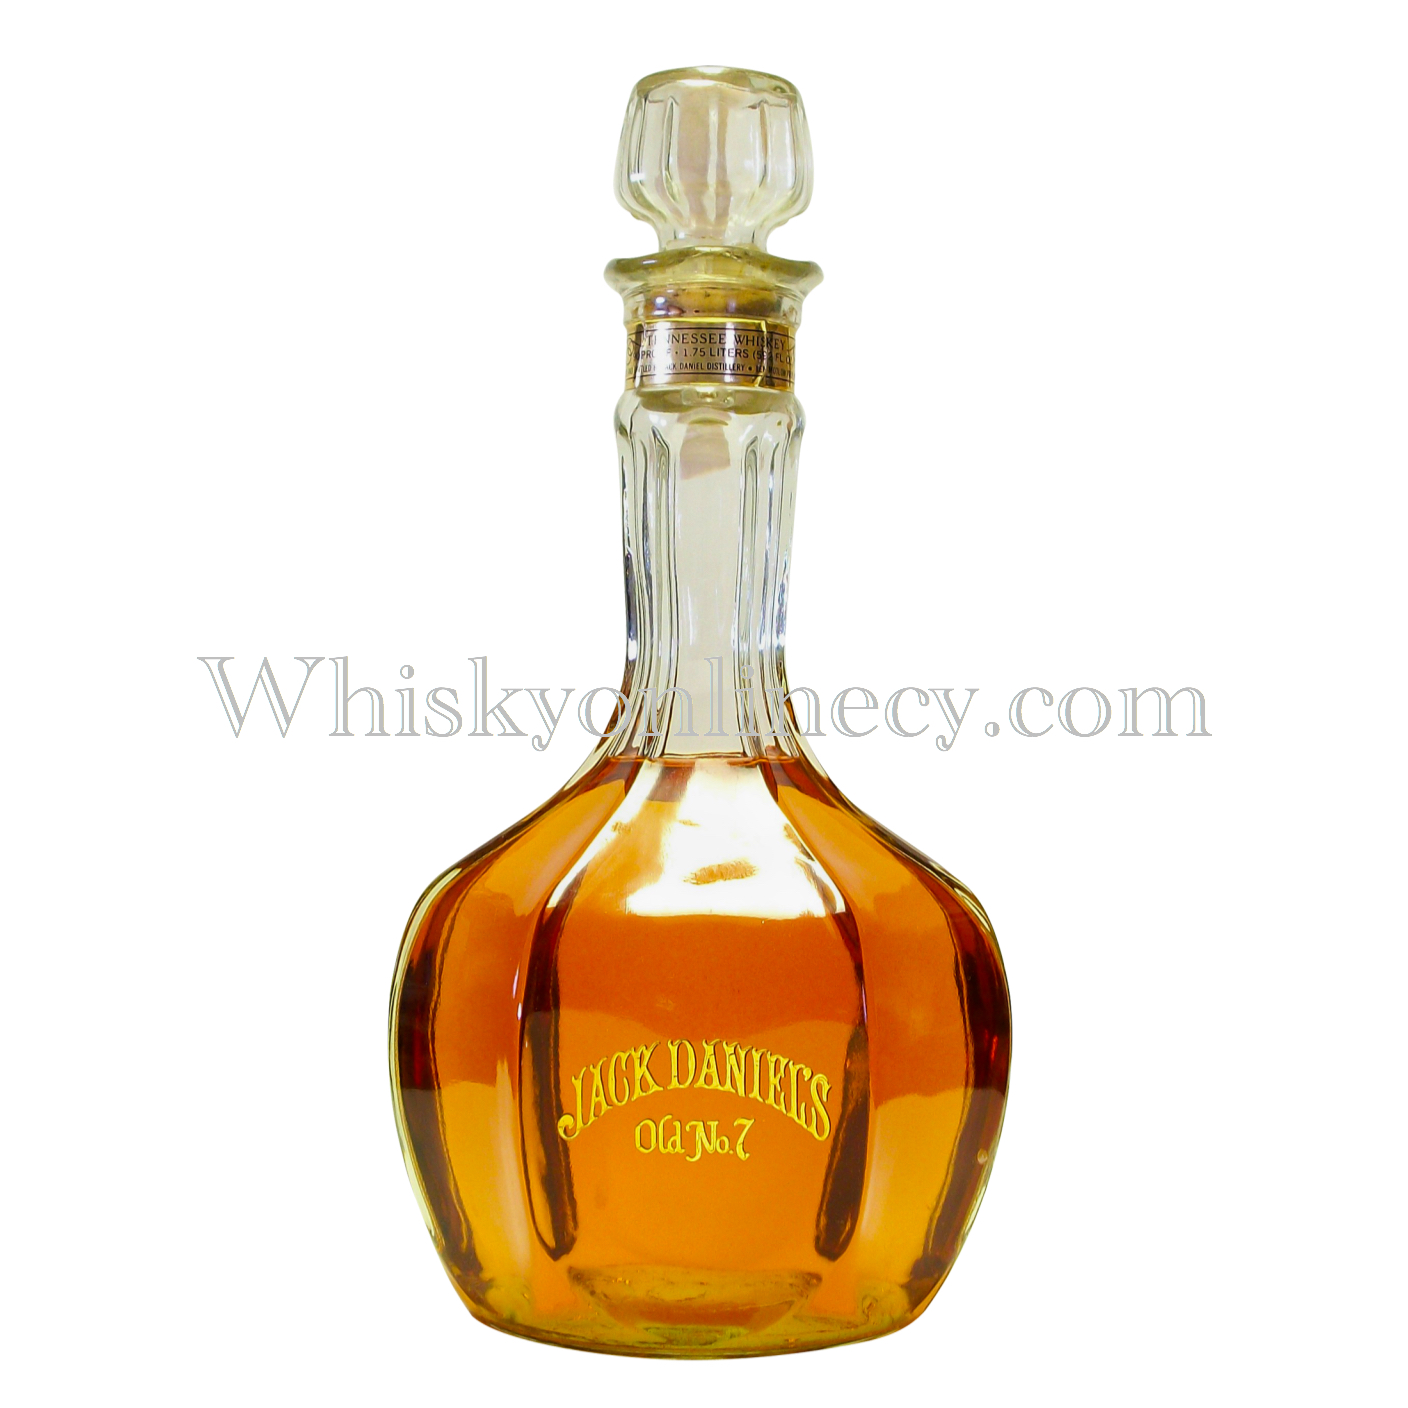 Whisky Online Cyprus - Jack Daniels Inaugural Decanter release 1984